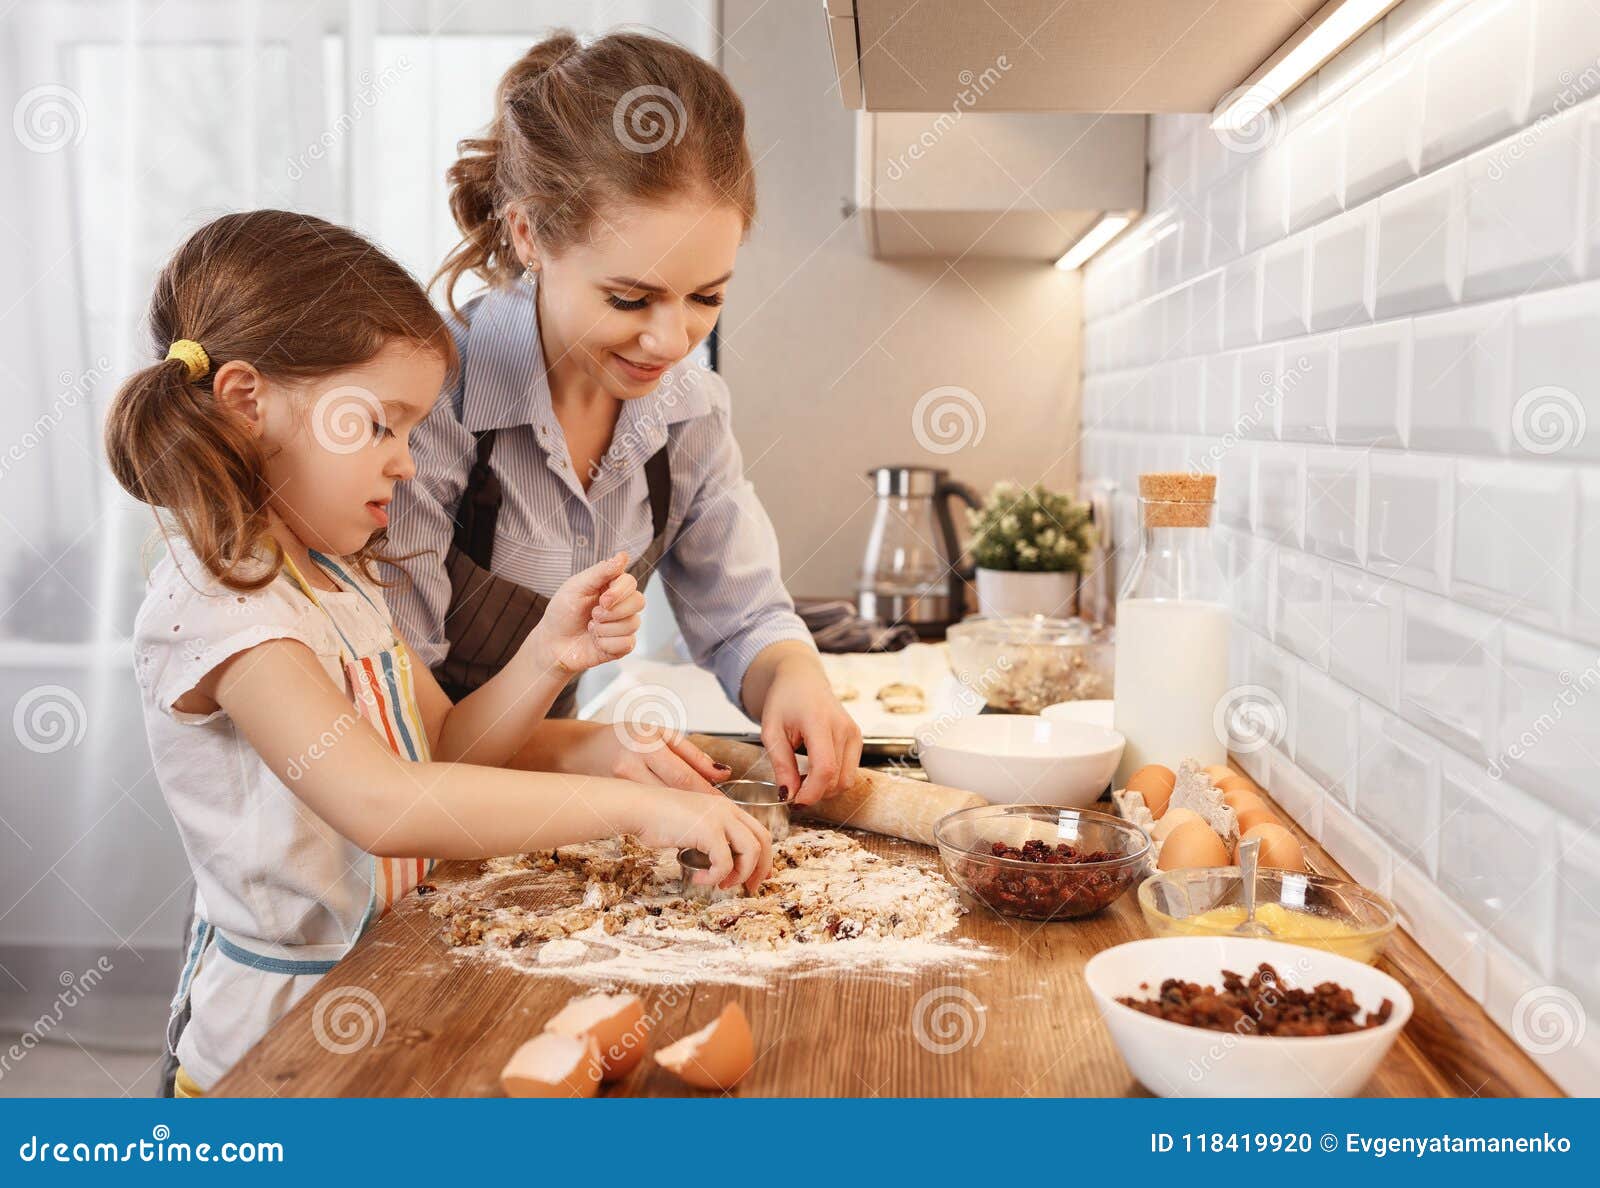 happy family in kitchen. mother and child daughter baking cookies